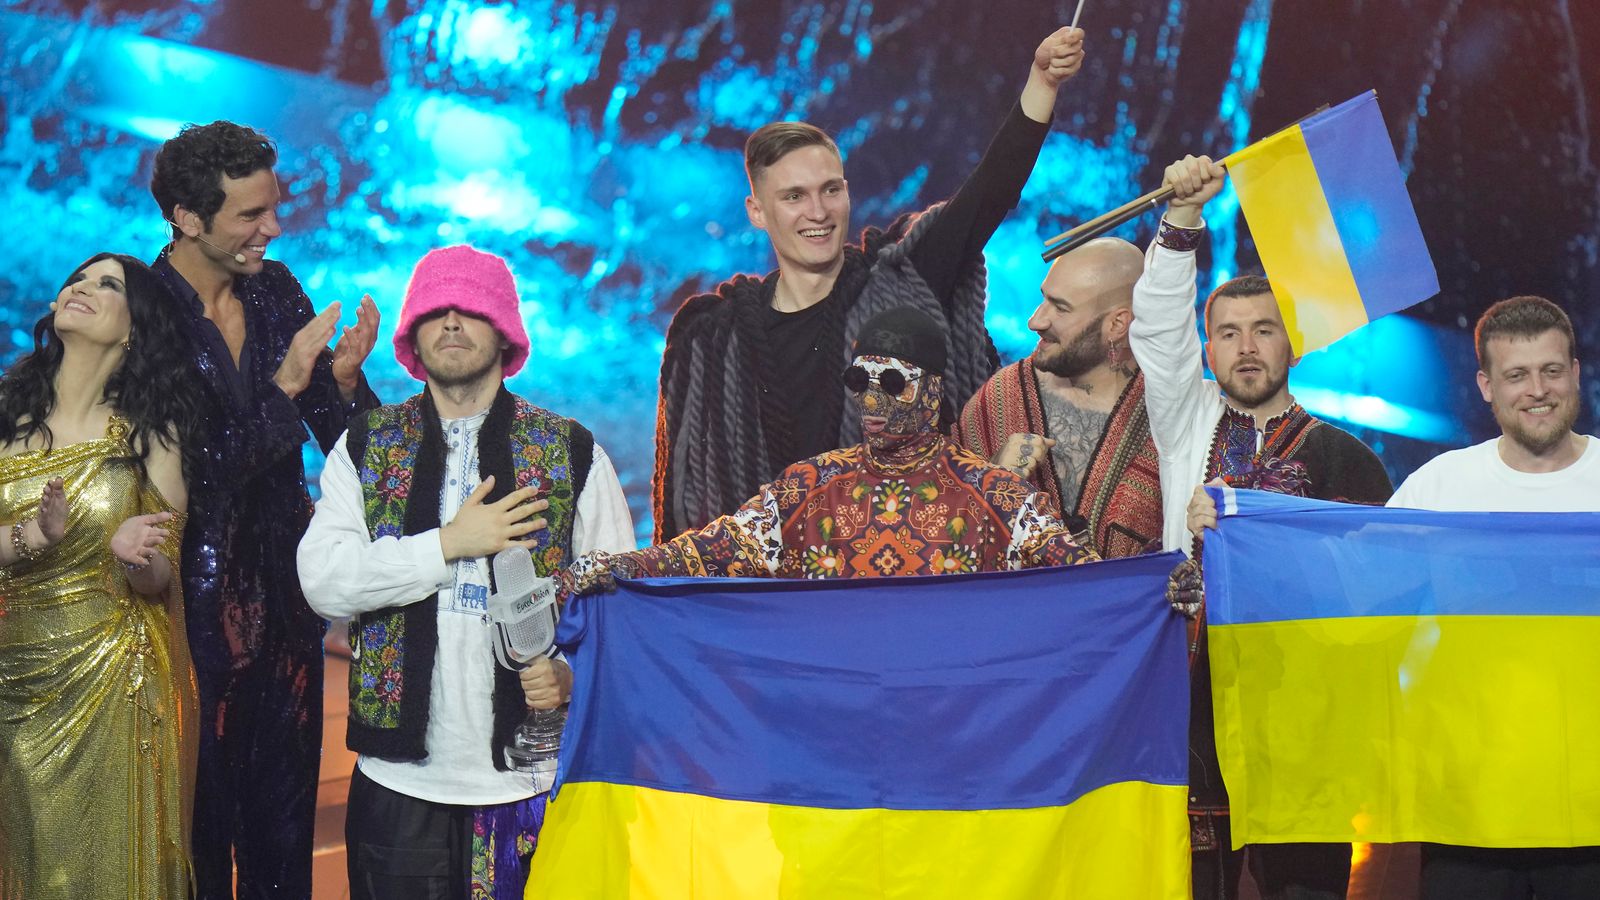 Ukraine has won the Eurovision Song Contest in a huge show of support from the rest of the continent following Russia's invasion of the country. Perfo